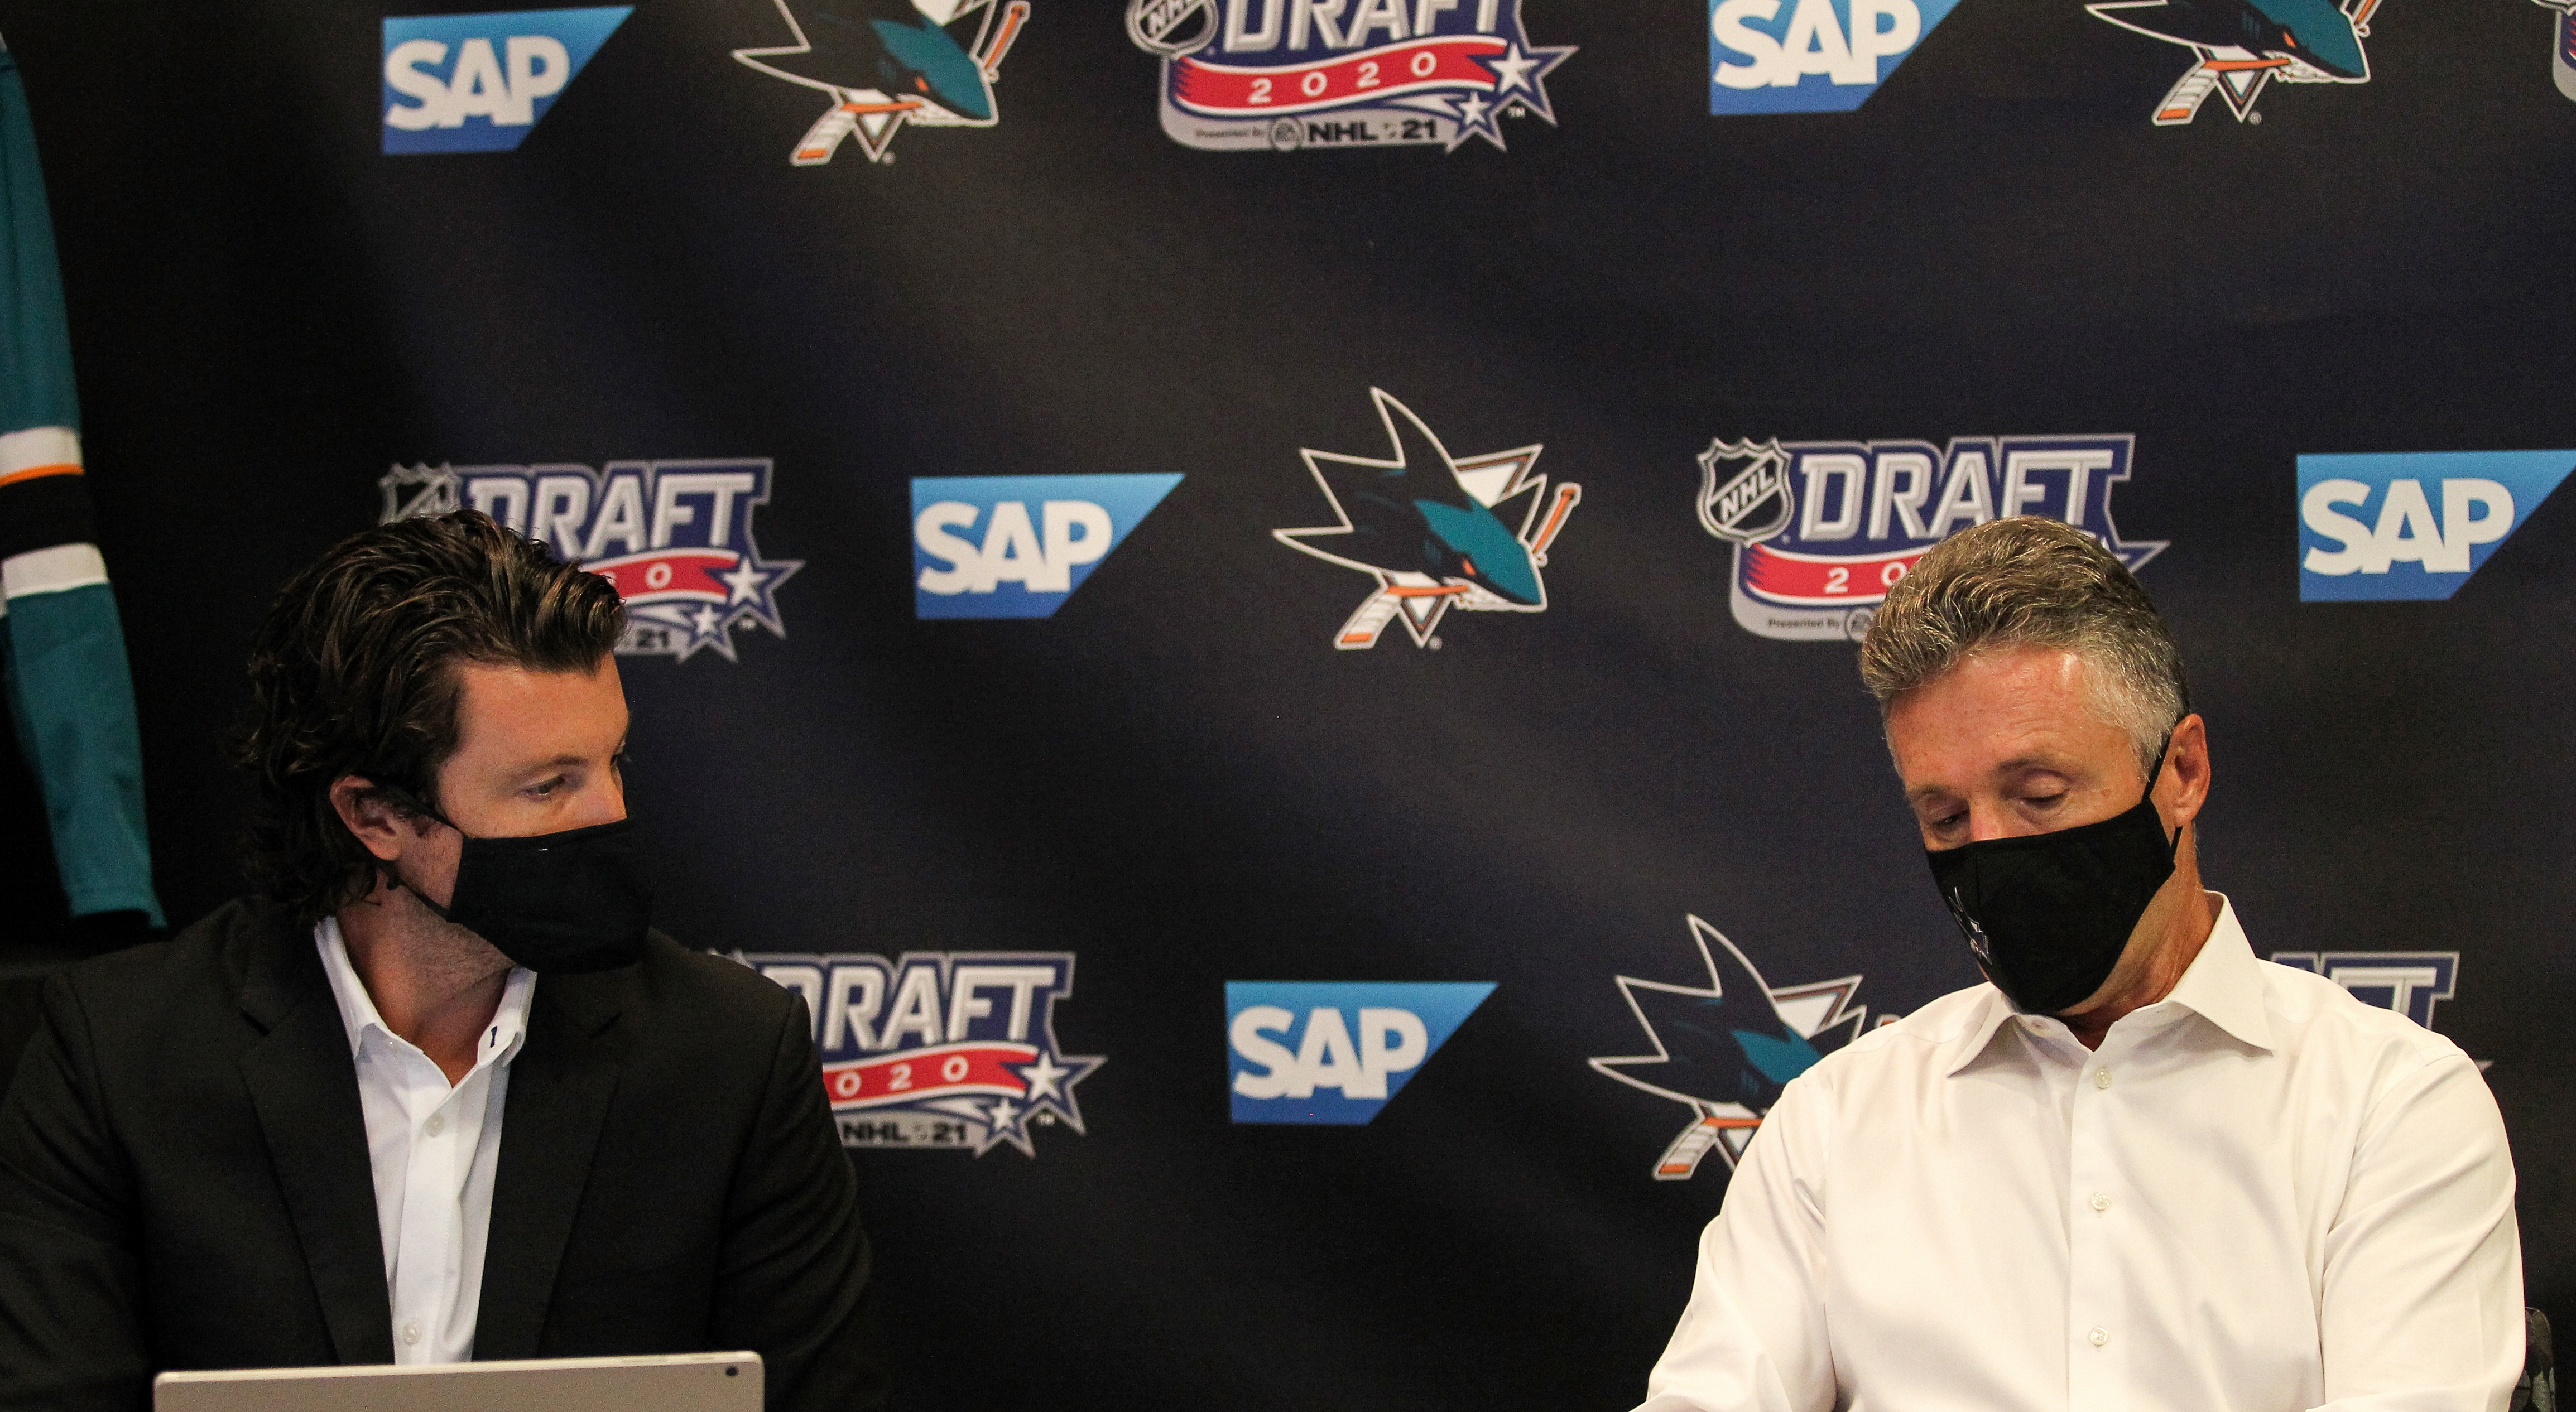 SAN JOSE, CA - OCTOBER 06: San Jose Sharks General Manager Doug Wilson and Director of Scouting Doug Wilson Jr. prepare before Round One of the 2020 NHL Draft on October 6, 2020 at SAP Center in San Jose, California. The 2020 NHL Draft was held virtually due to the ongoing Coronavirus pandemic.